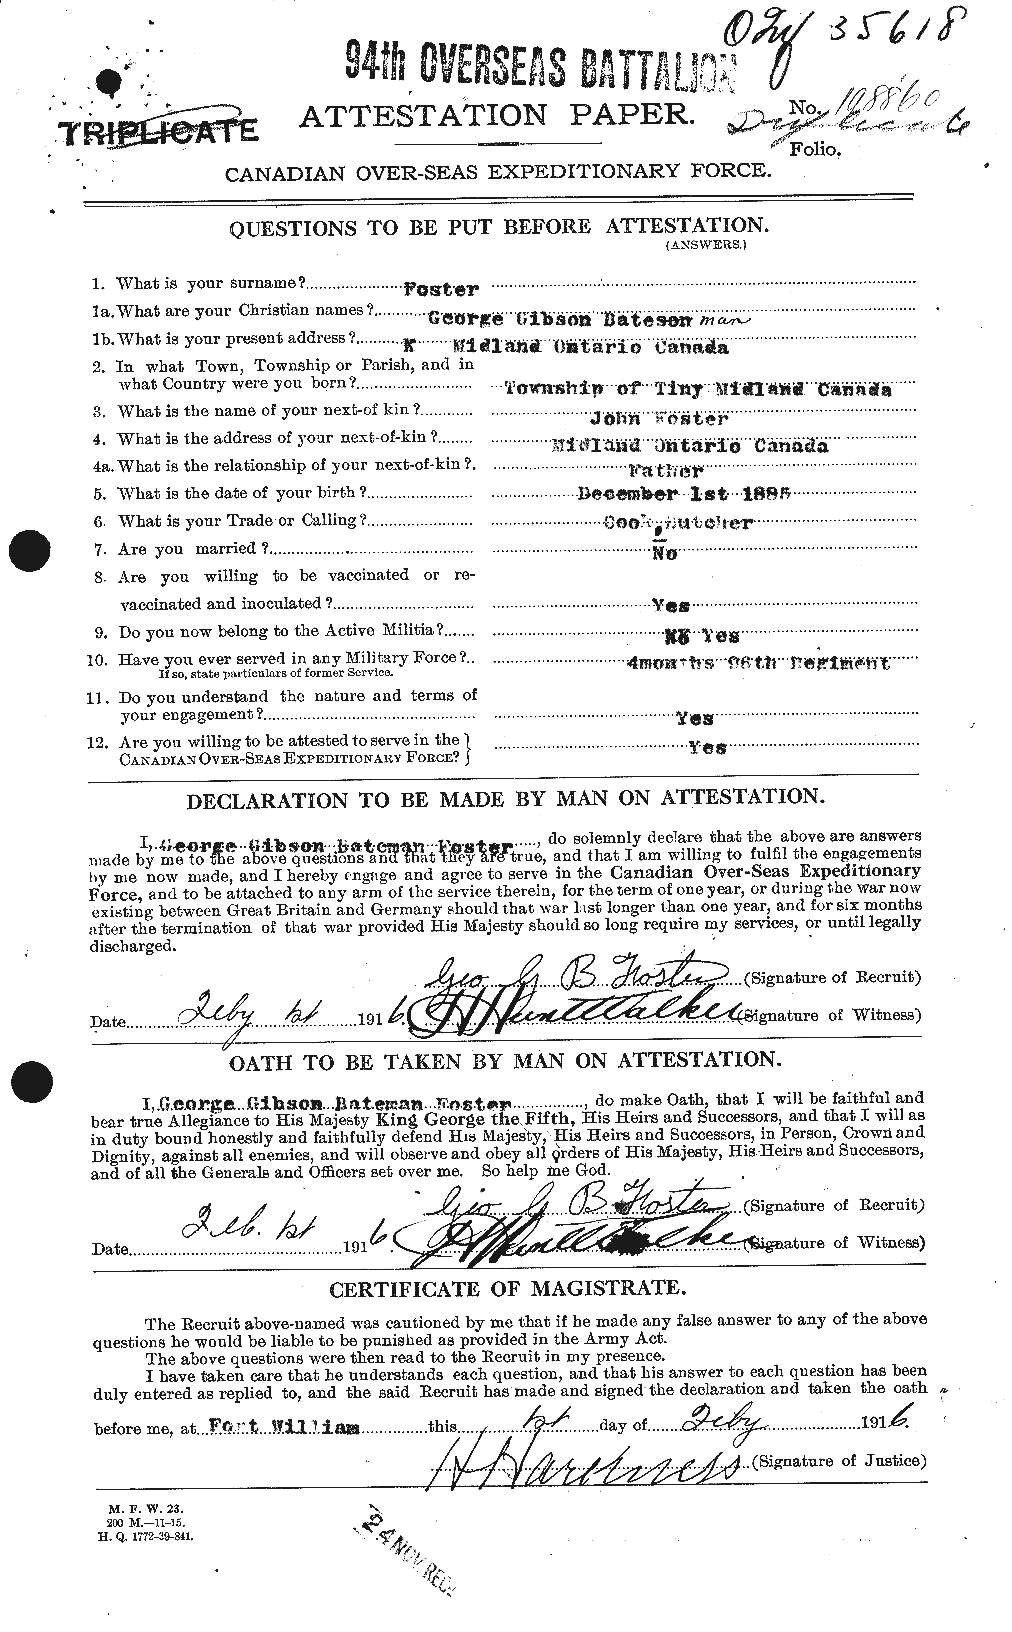 Personnel Records of the First World War - CEF 330690a